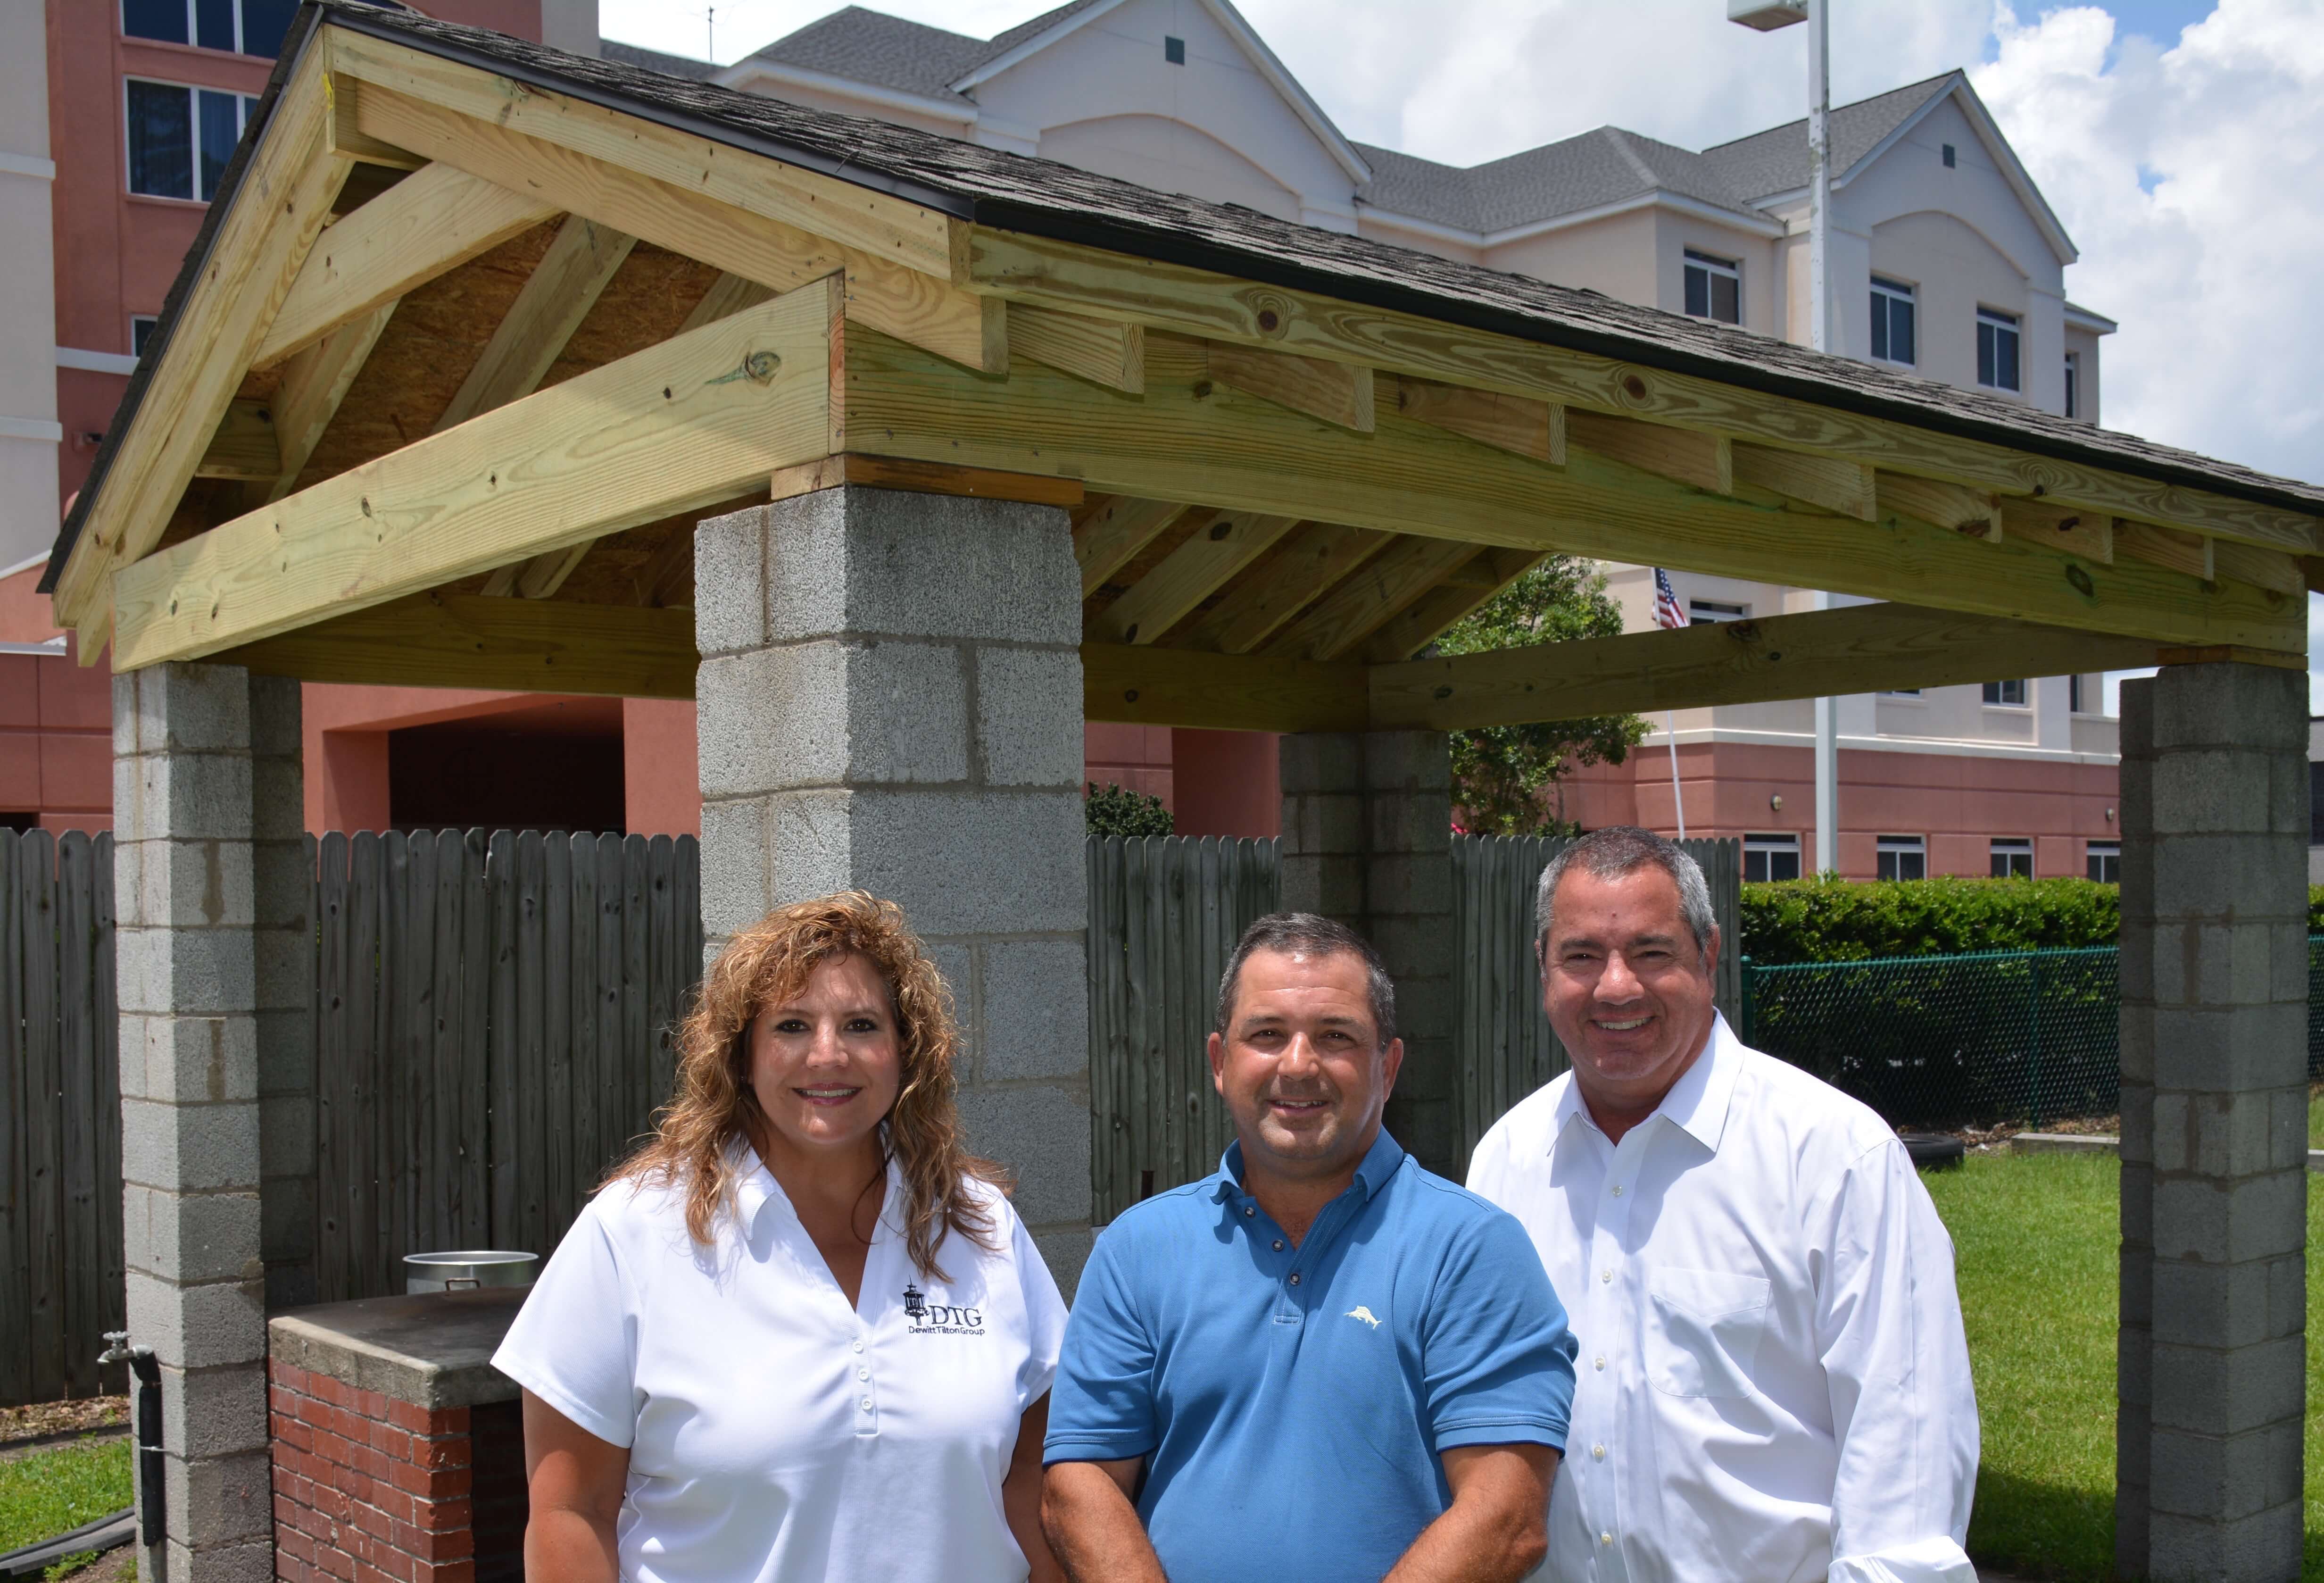 Pictured (Left to Right): Kim Thomas, Chris Tilton and Andrew DeWitt of the Dewitt Tilton Group in front of the newly built BBQ Pitt Roof for the Savannah Jaycees.